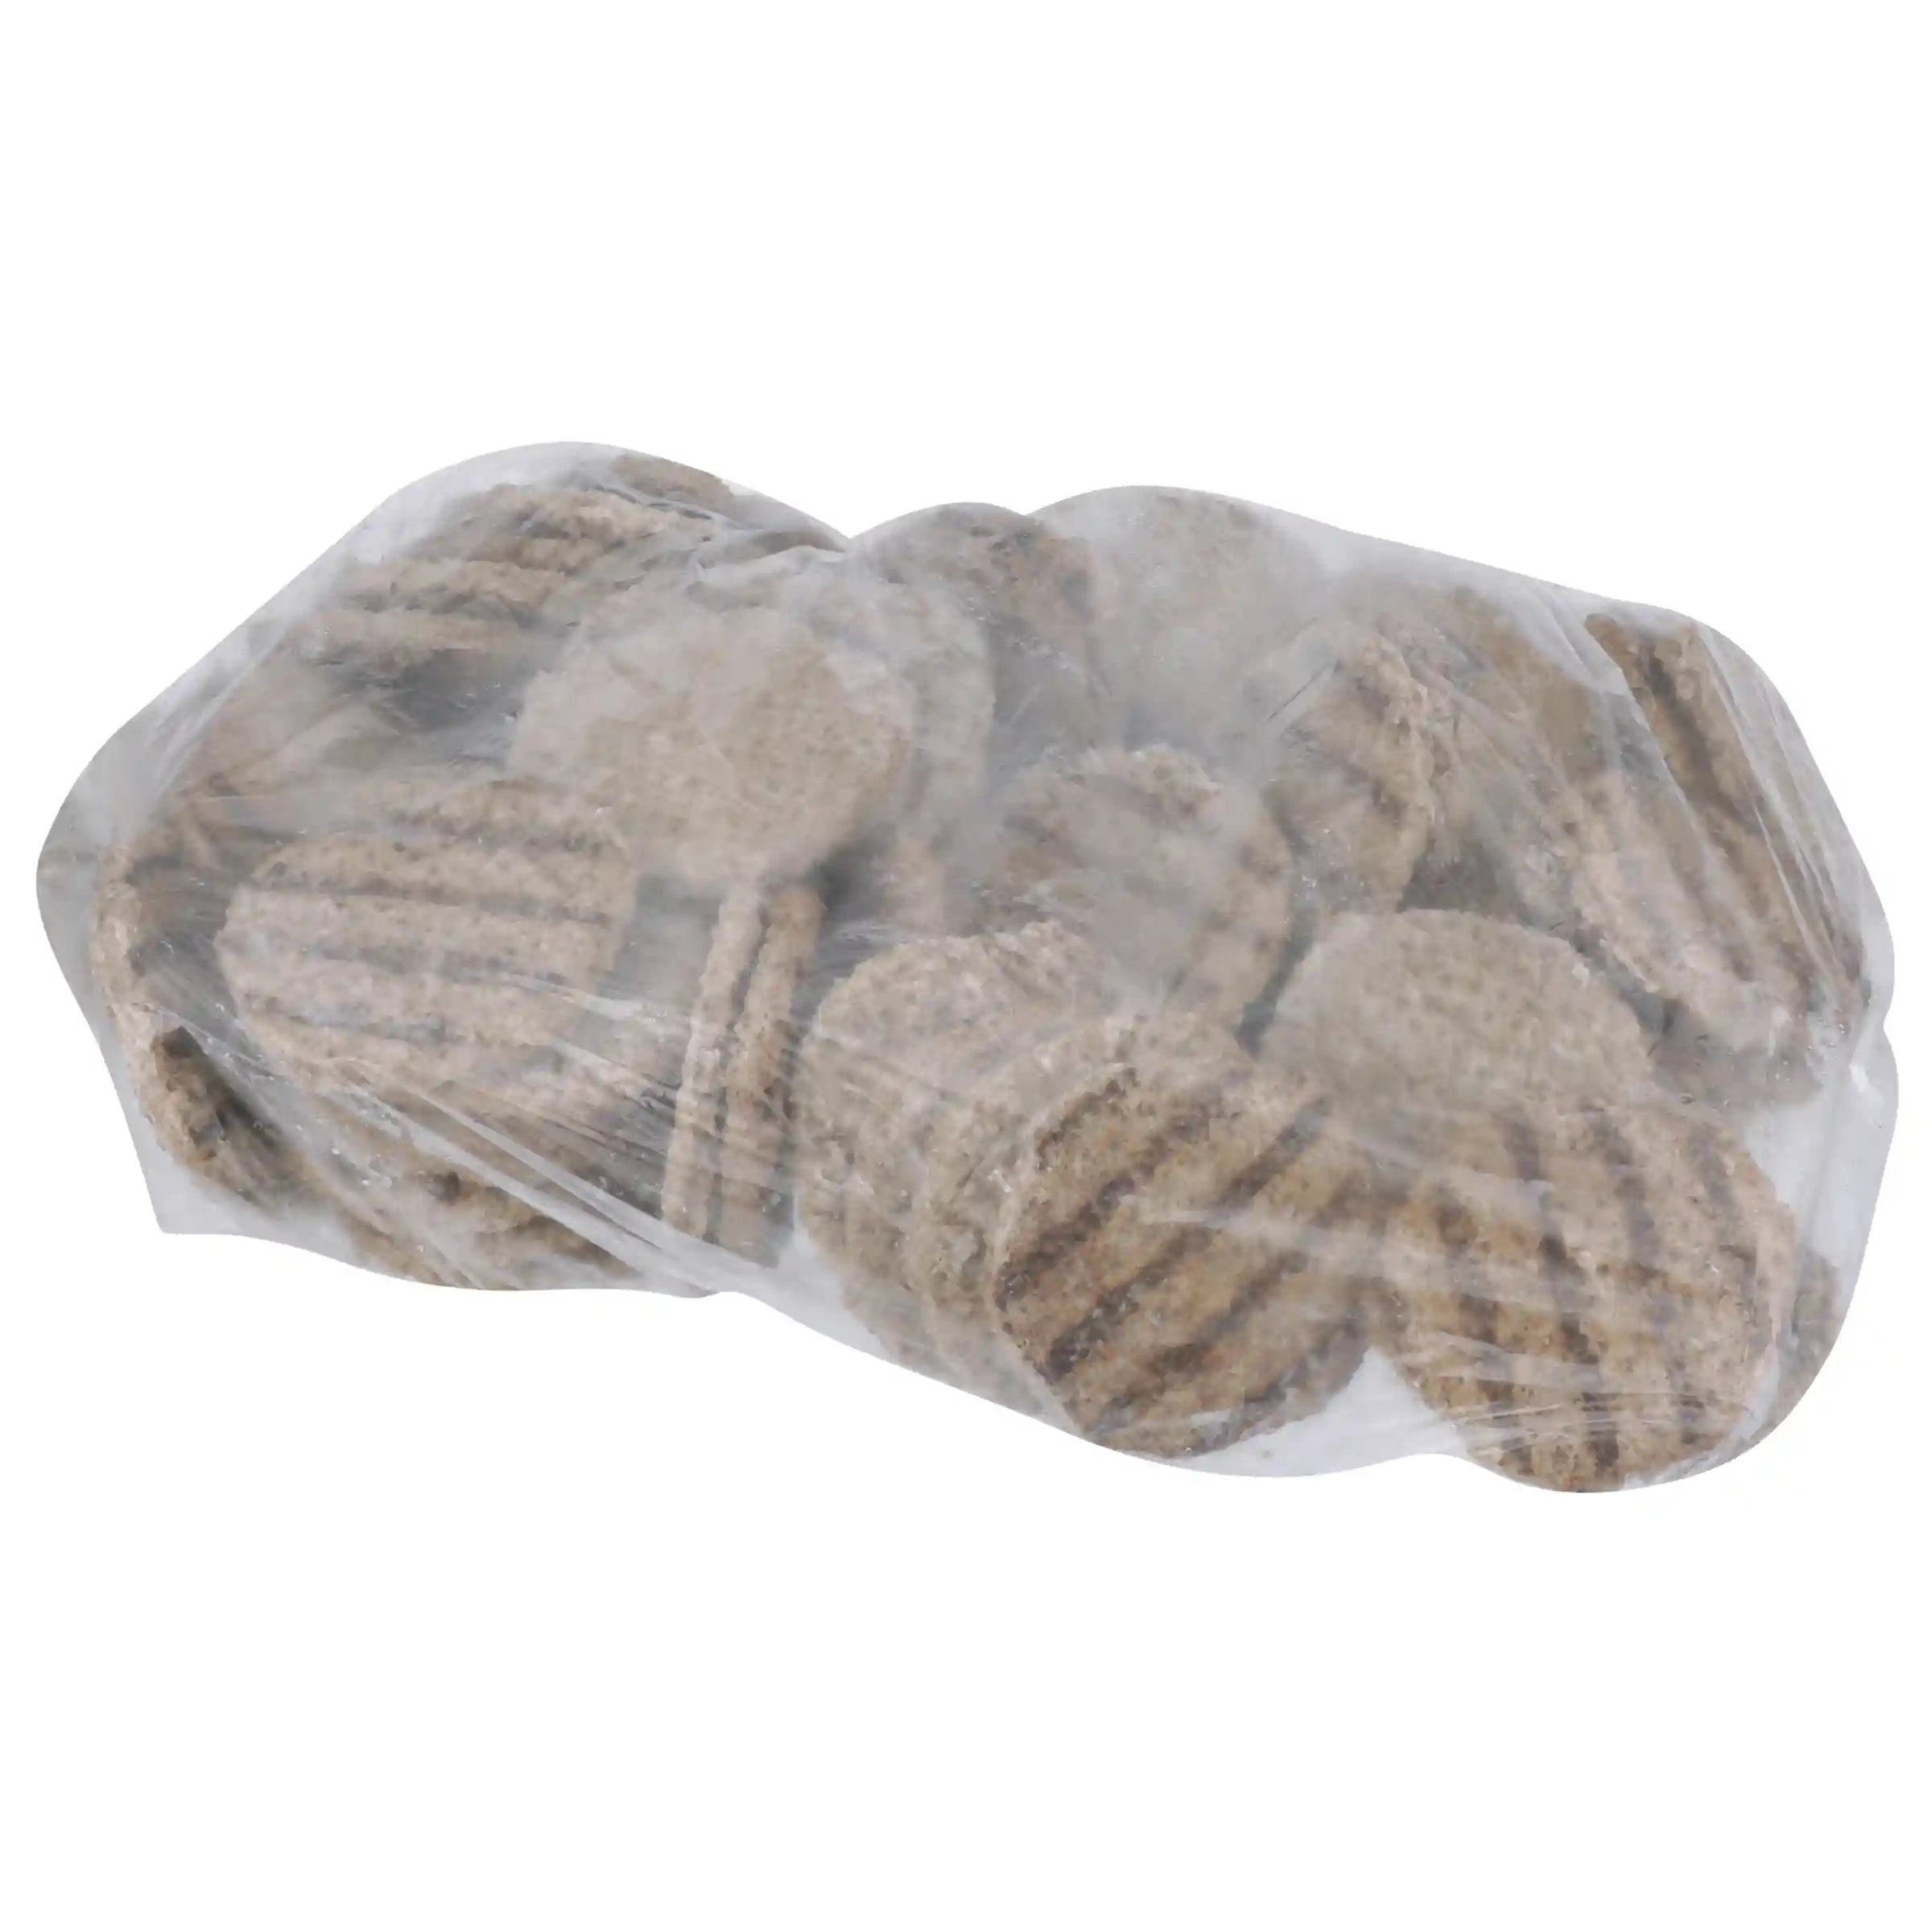 Tenderbroil® Fully Cooked Flame Grilled Beef Pattie, 4 oz, 64 Pieces per case, 16 Lbs      _image_21